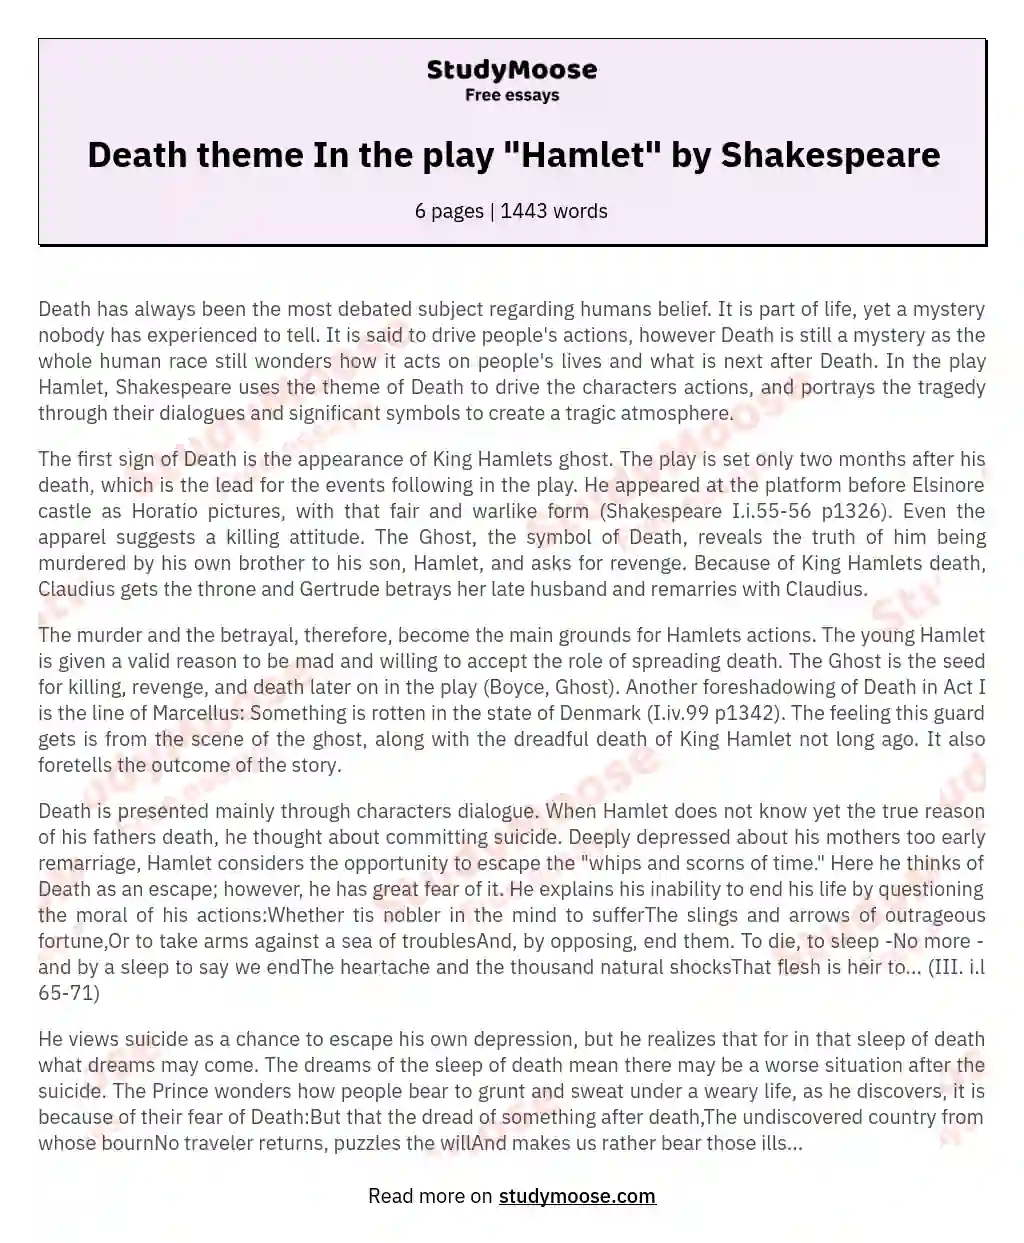 Death theme In the play "Hamlet" by Shakespeare essay